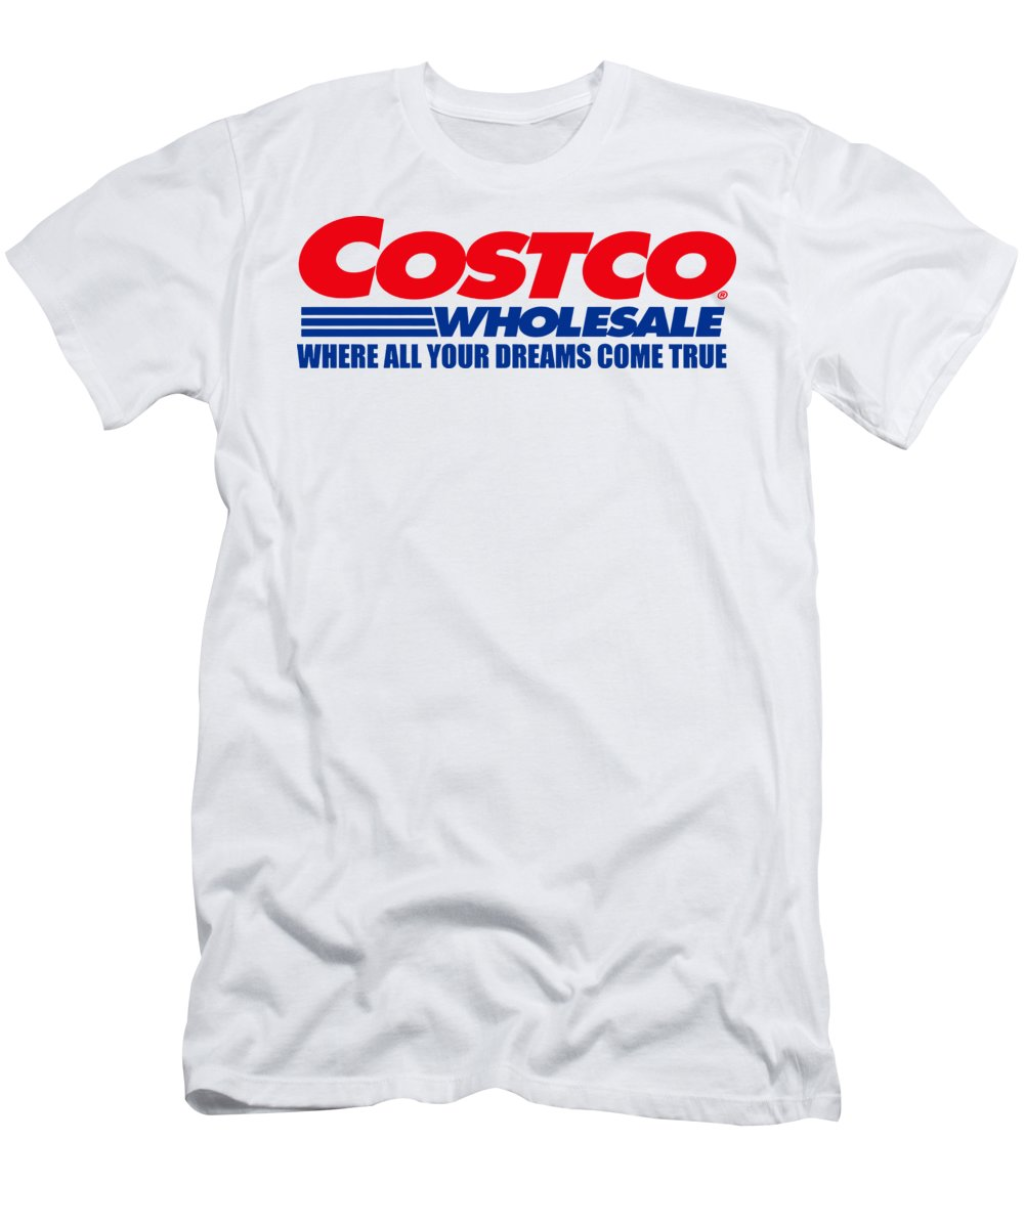 Picture of: Costco T-Shirt by Oryza Nosativa – Pixels